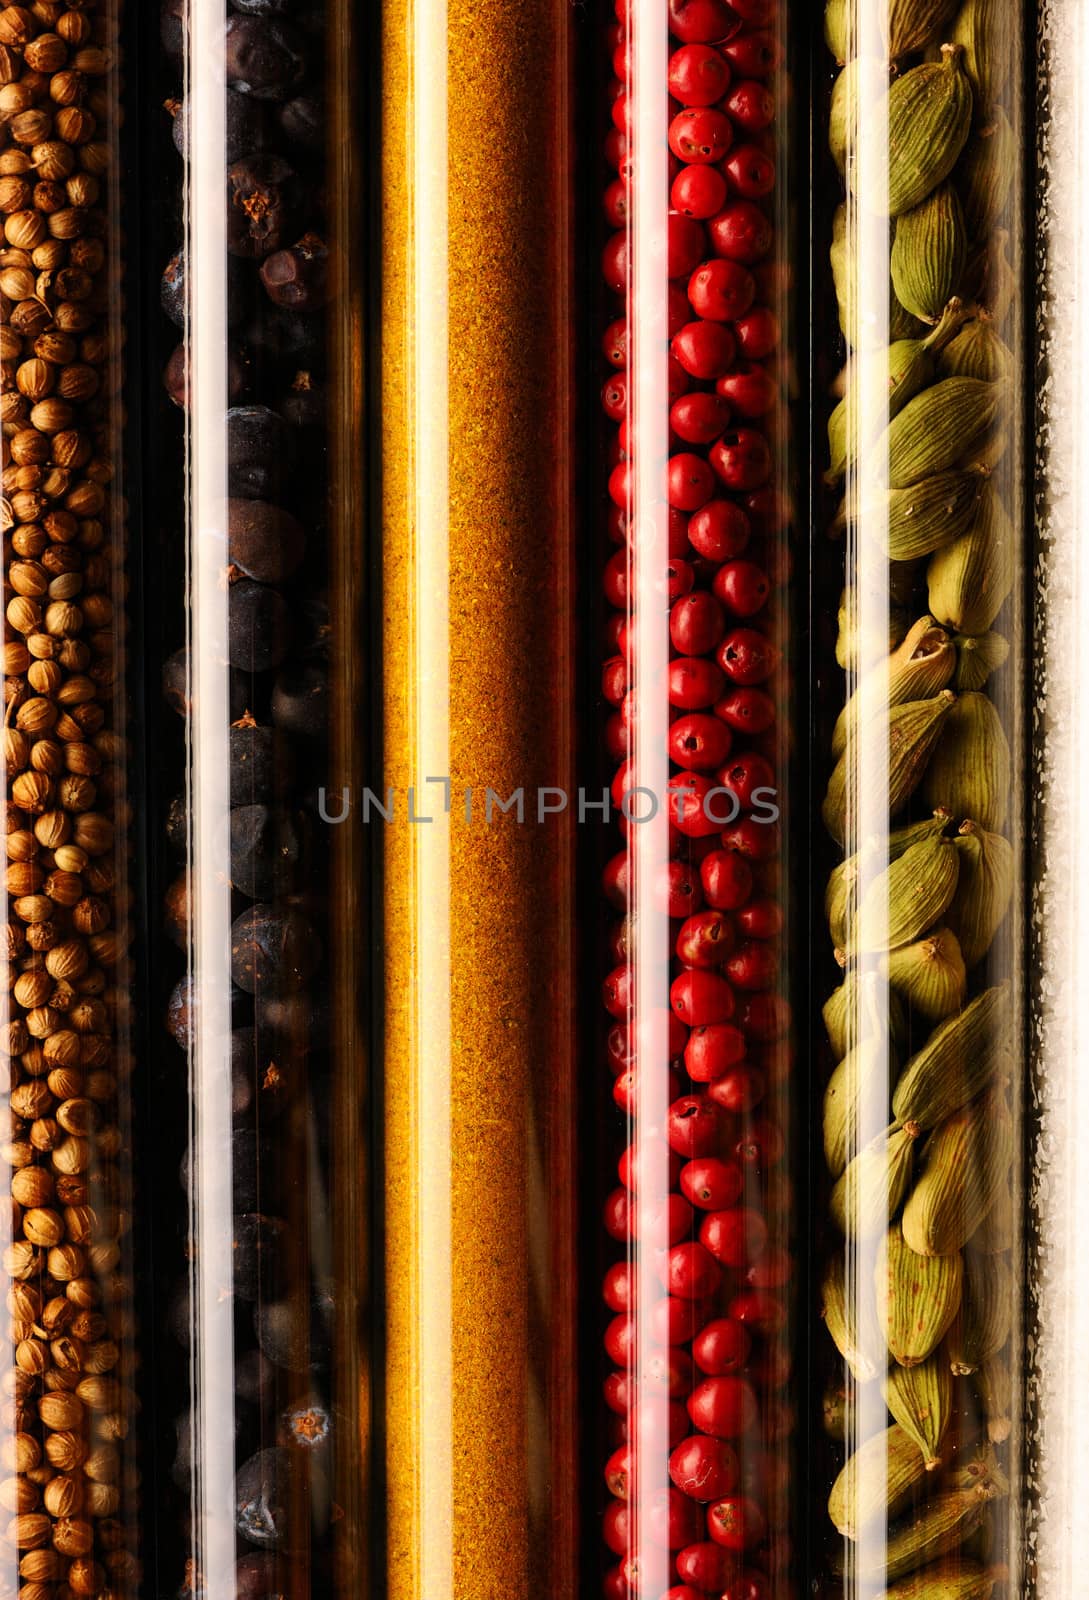 Spices in beakers close-up by haveseen